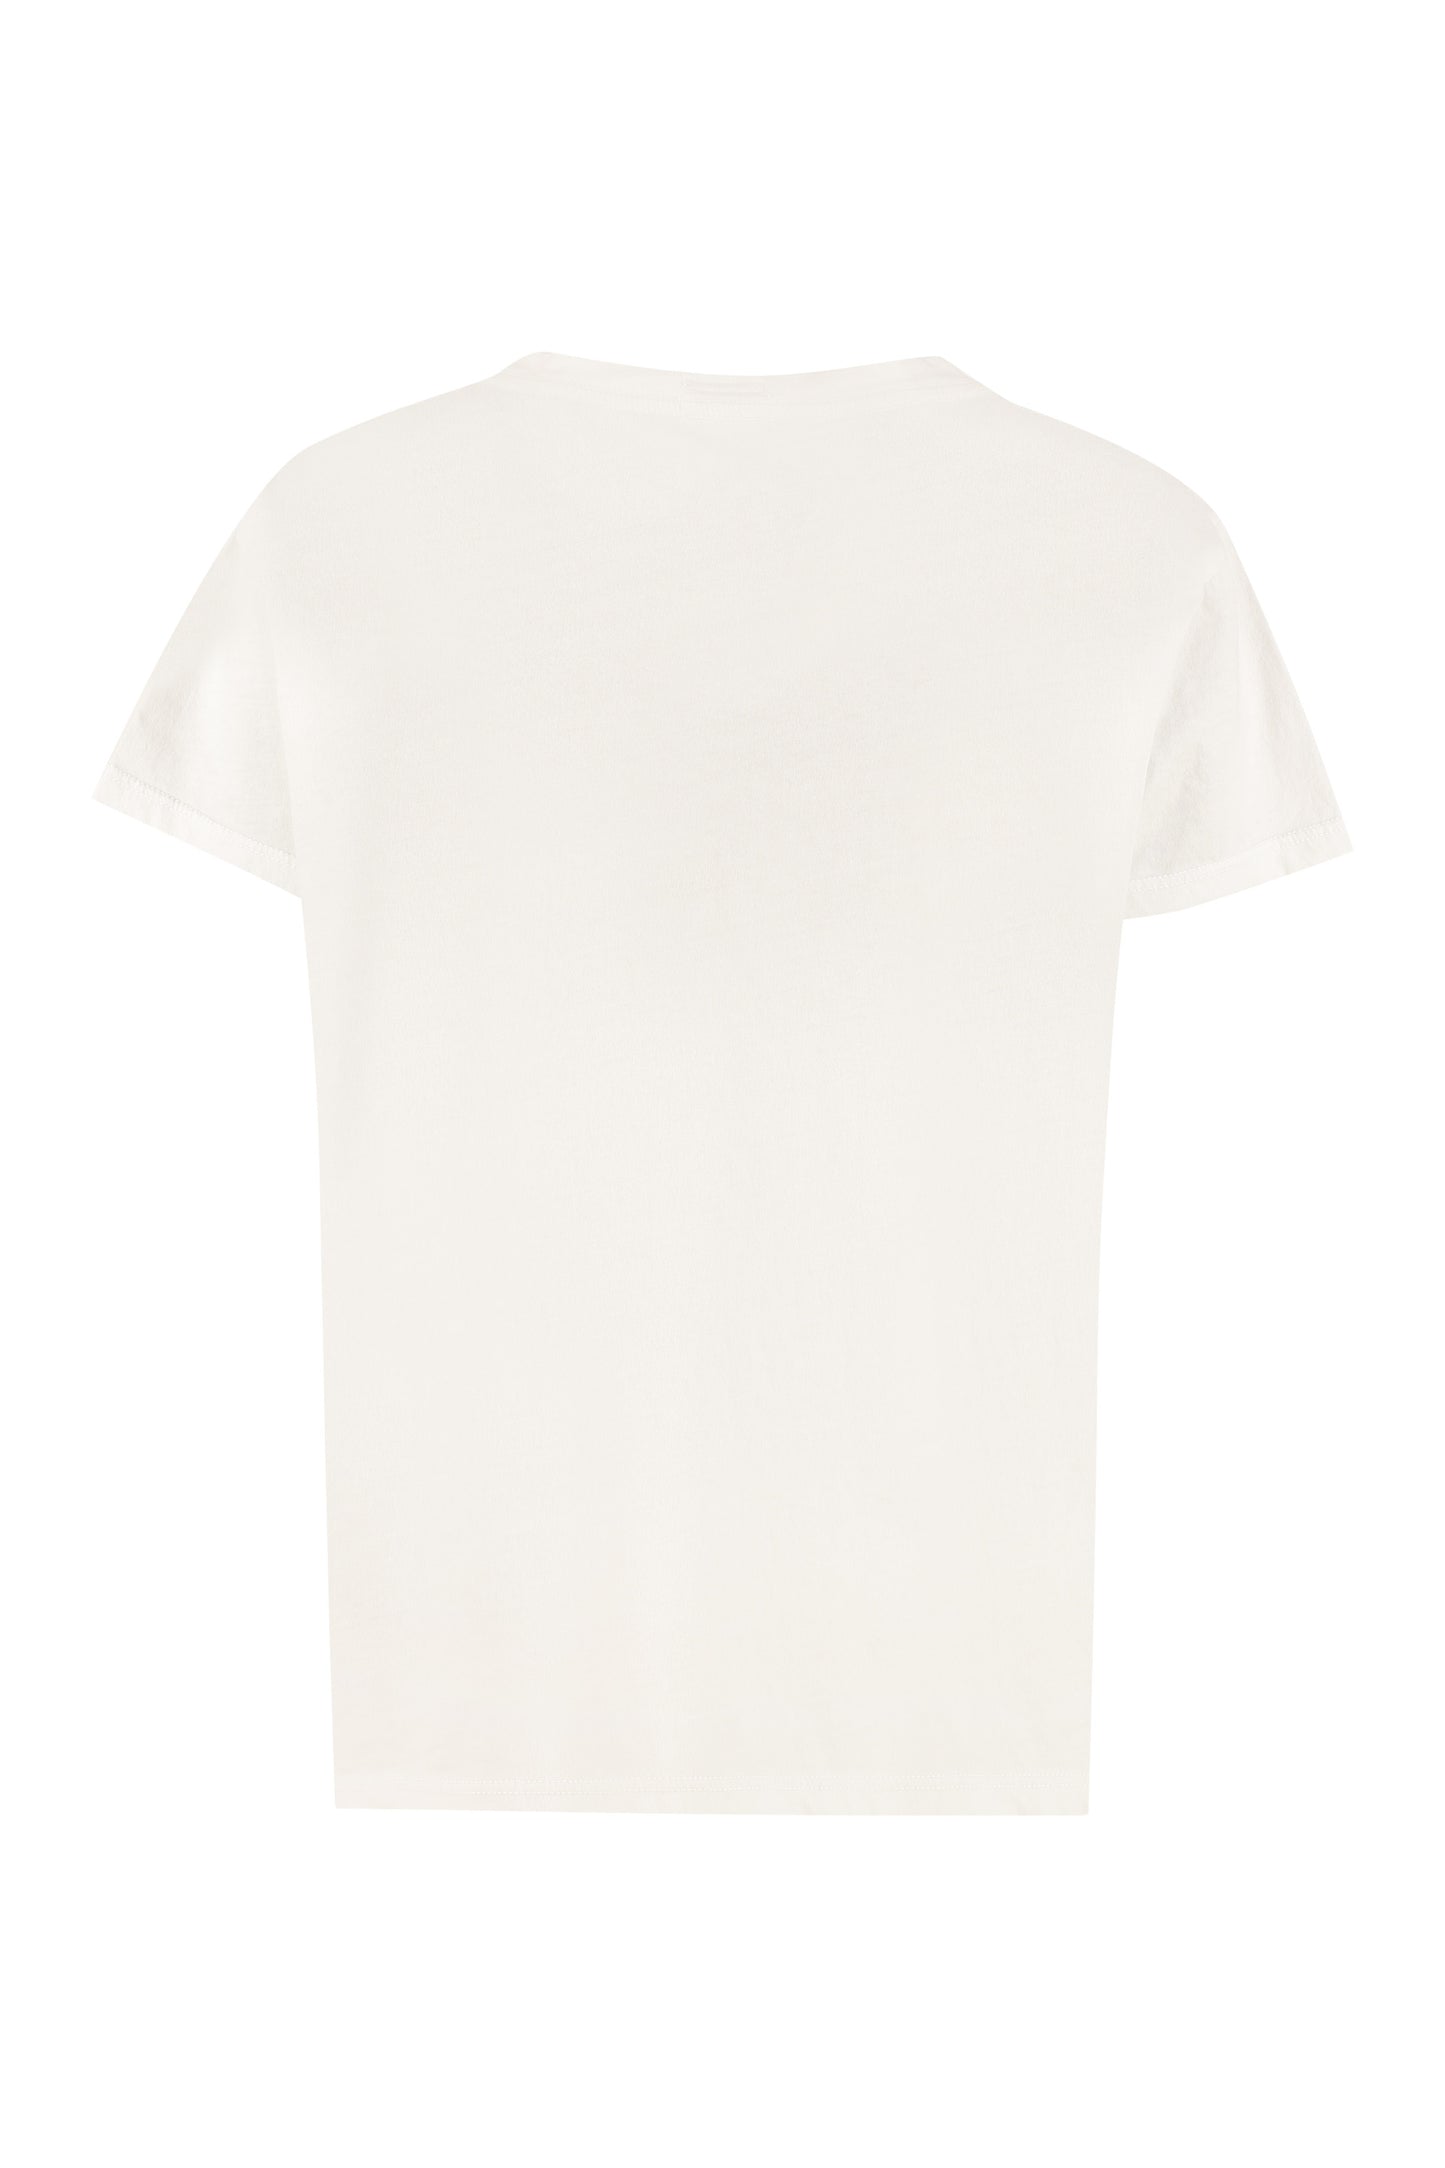 The Boxy Goodie Goodie cotton T-shirt